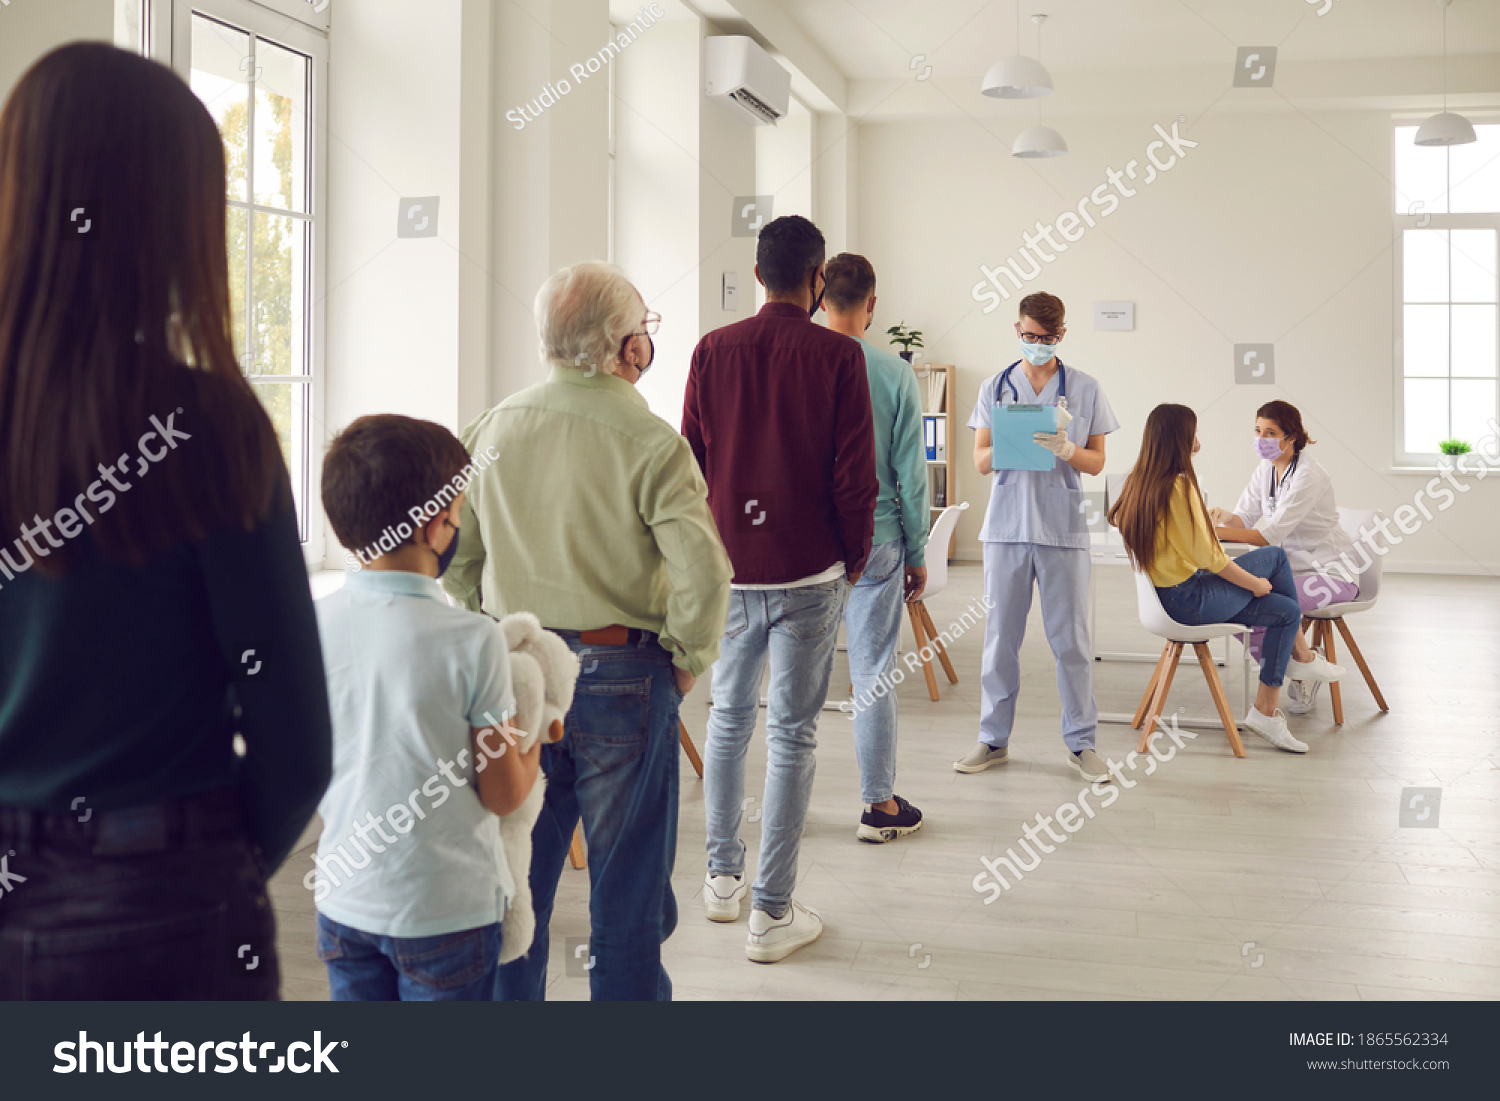 Diverse people lining up waiting for their turn to get shots at the hospital vaccination center. Young men and women, senior citizens and kids standing in queue for antiviral Covid-19 or flu vaccine #1865562334